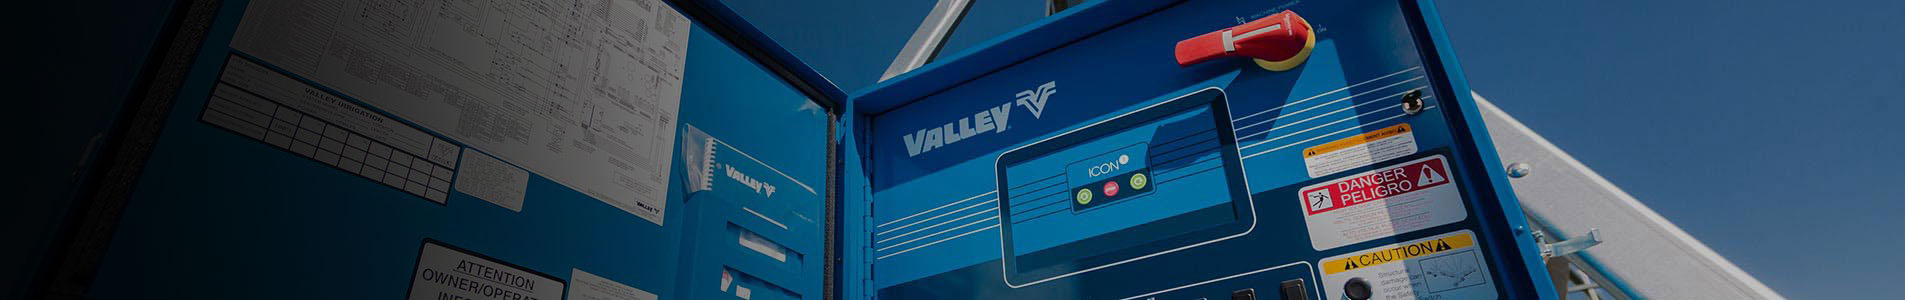 valley icon1 smart panel - irrigation control panel solution